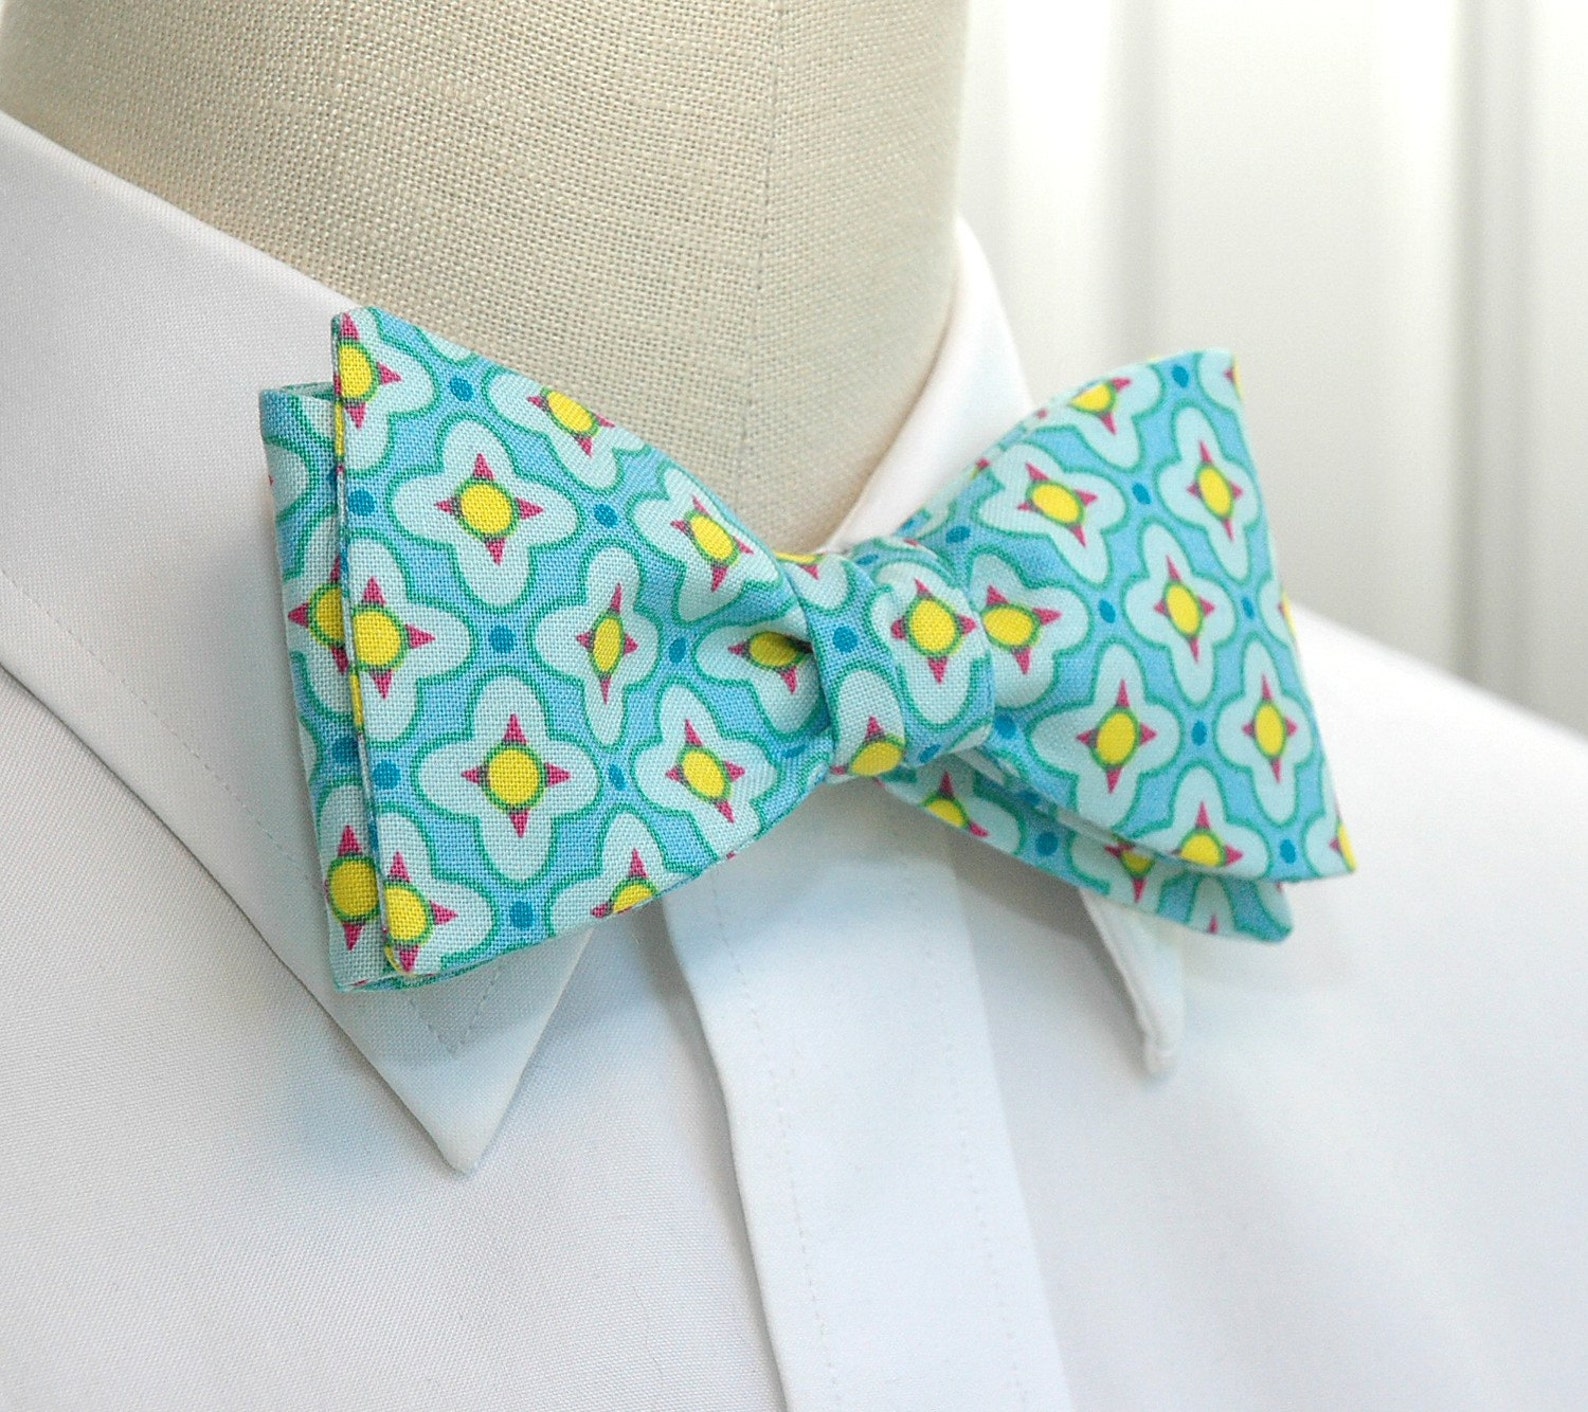 Men's Bow Tie turquoise/yellow tile pattern | Etsy